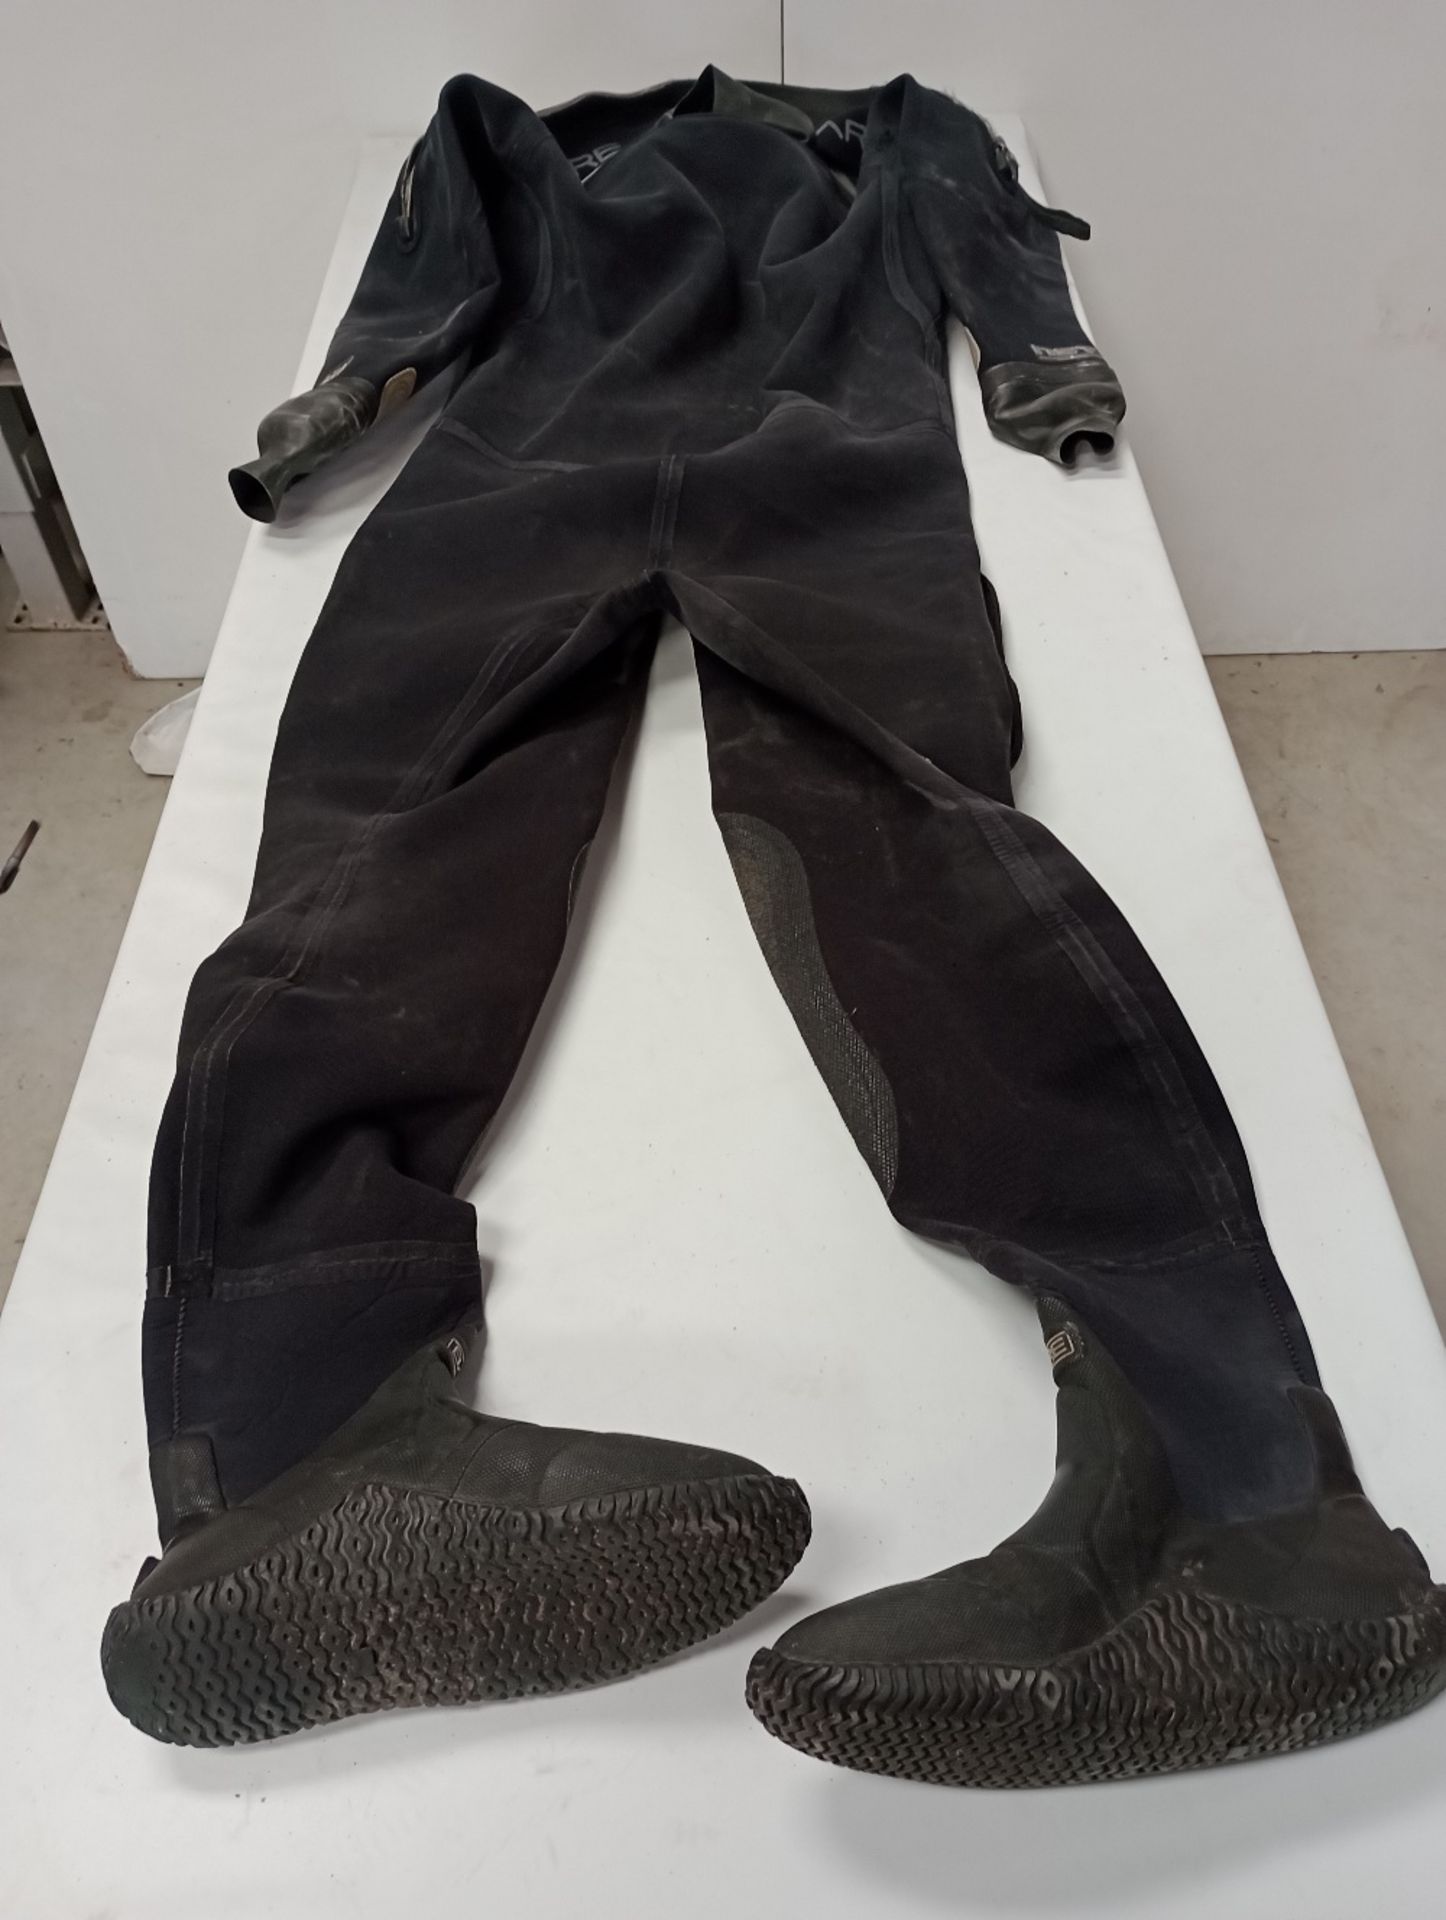 Bare XCD2 Drysuit, Serial No. W12871-09-00Q, Size Medium/Large Tall (Location: Brentwood. Please - Image 2 of 6